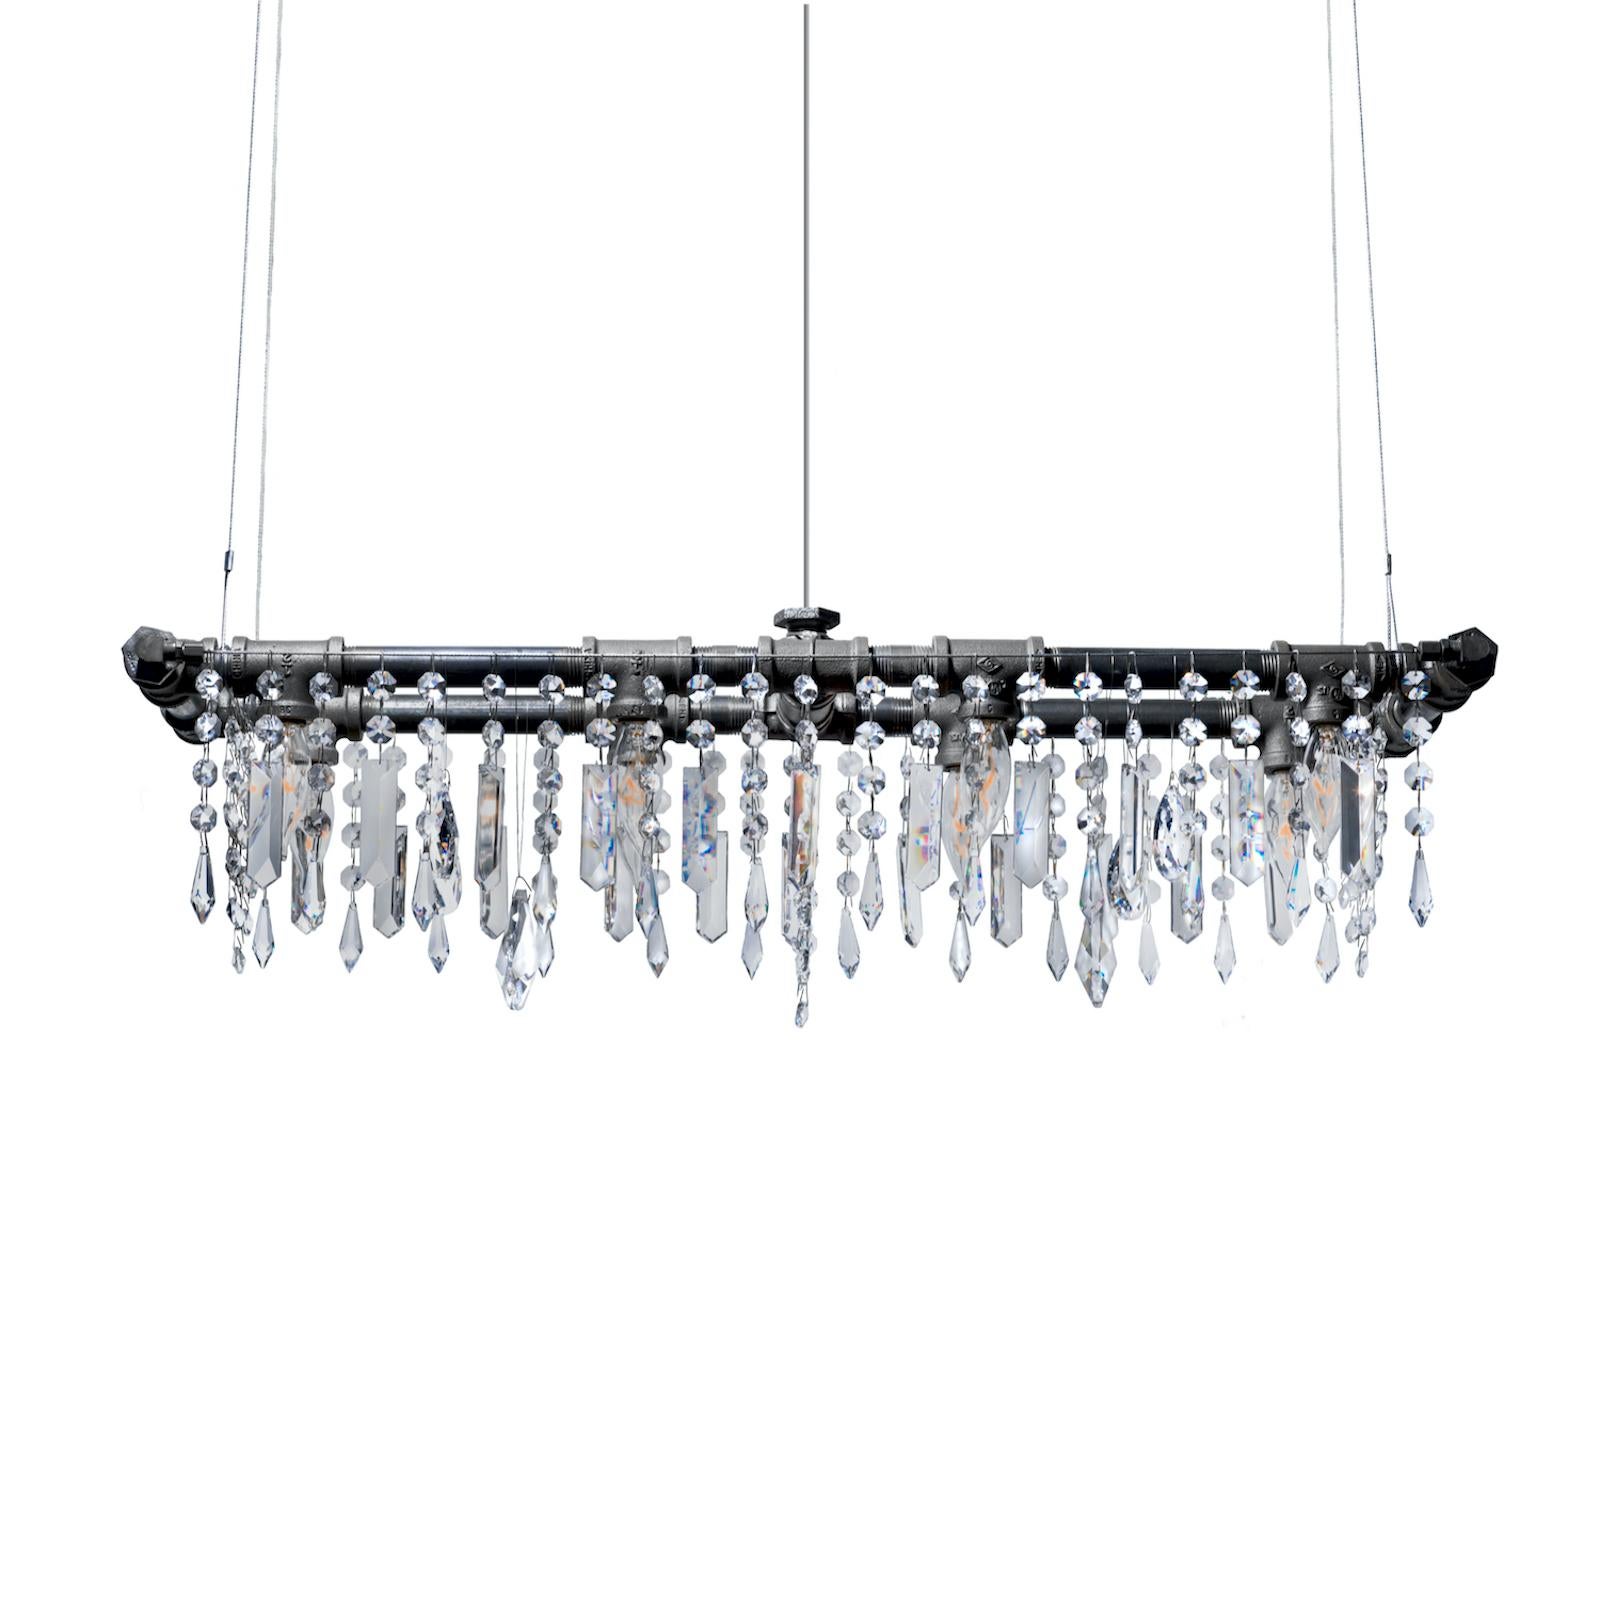 Tribeca Mini-Banqueting Chandelier, 8 Bulb, by Michael McHale
Dimensions: D 23 x W 70 x H 23 cm.
Materials: steel, optically-pure gem-cut crystal.

8 x candelabra base CA7 bulb, either incandescent or LED

All our lamps can be wired according